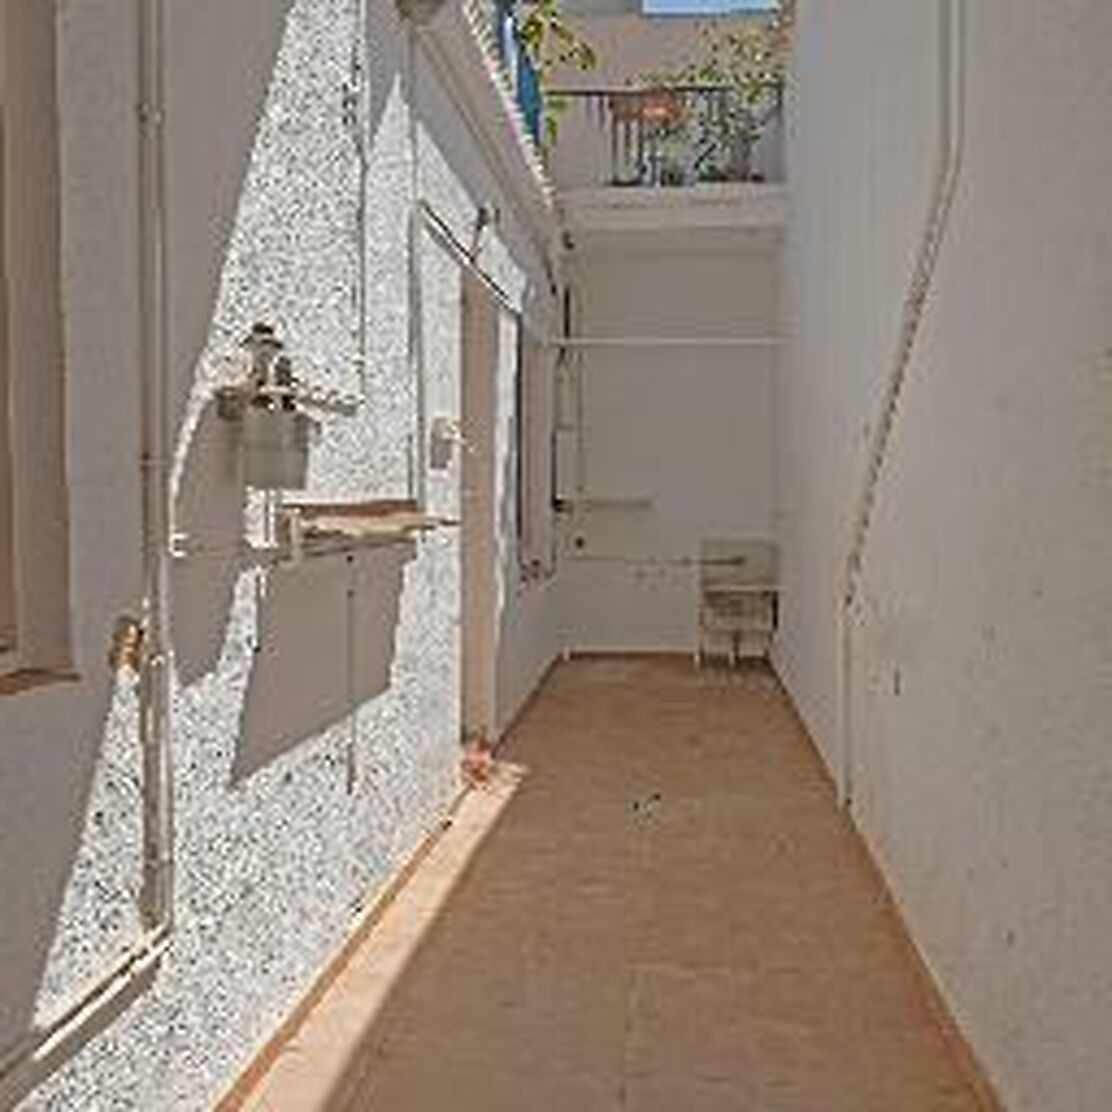 Comfortable bright flat with patio in pedestrian street with all amenities Shops,Market,Schools.